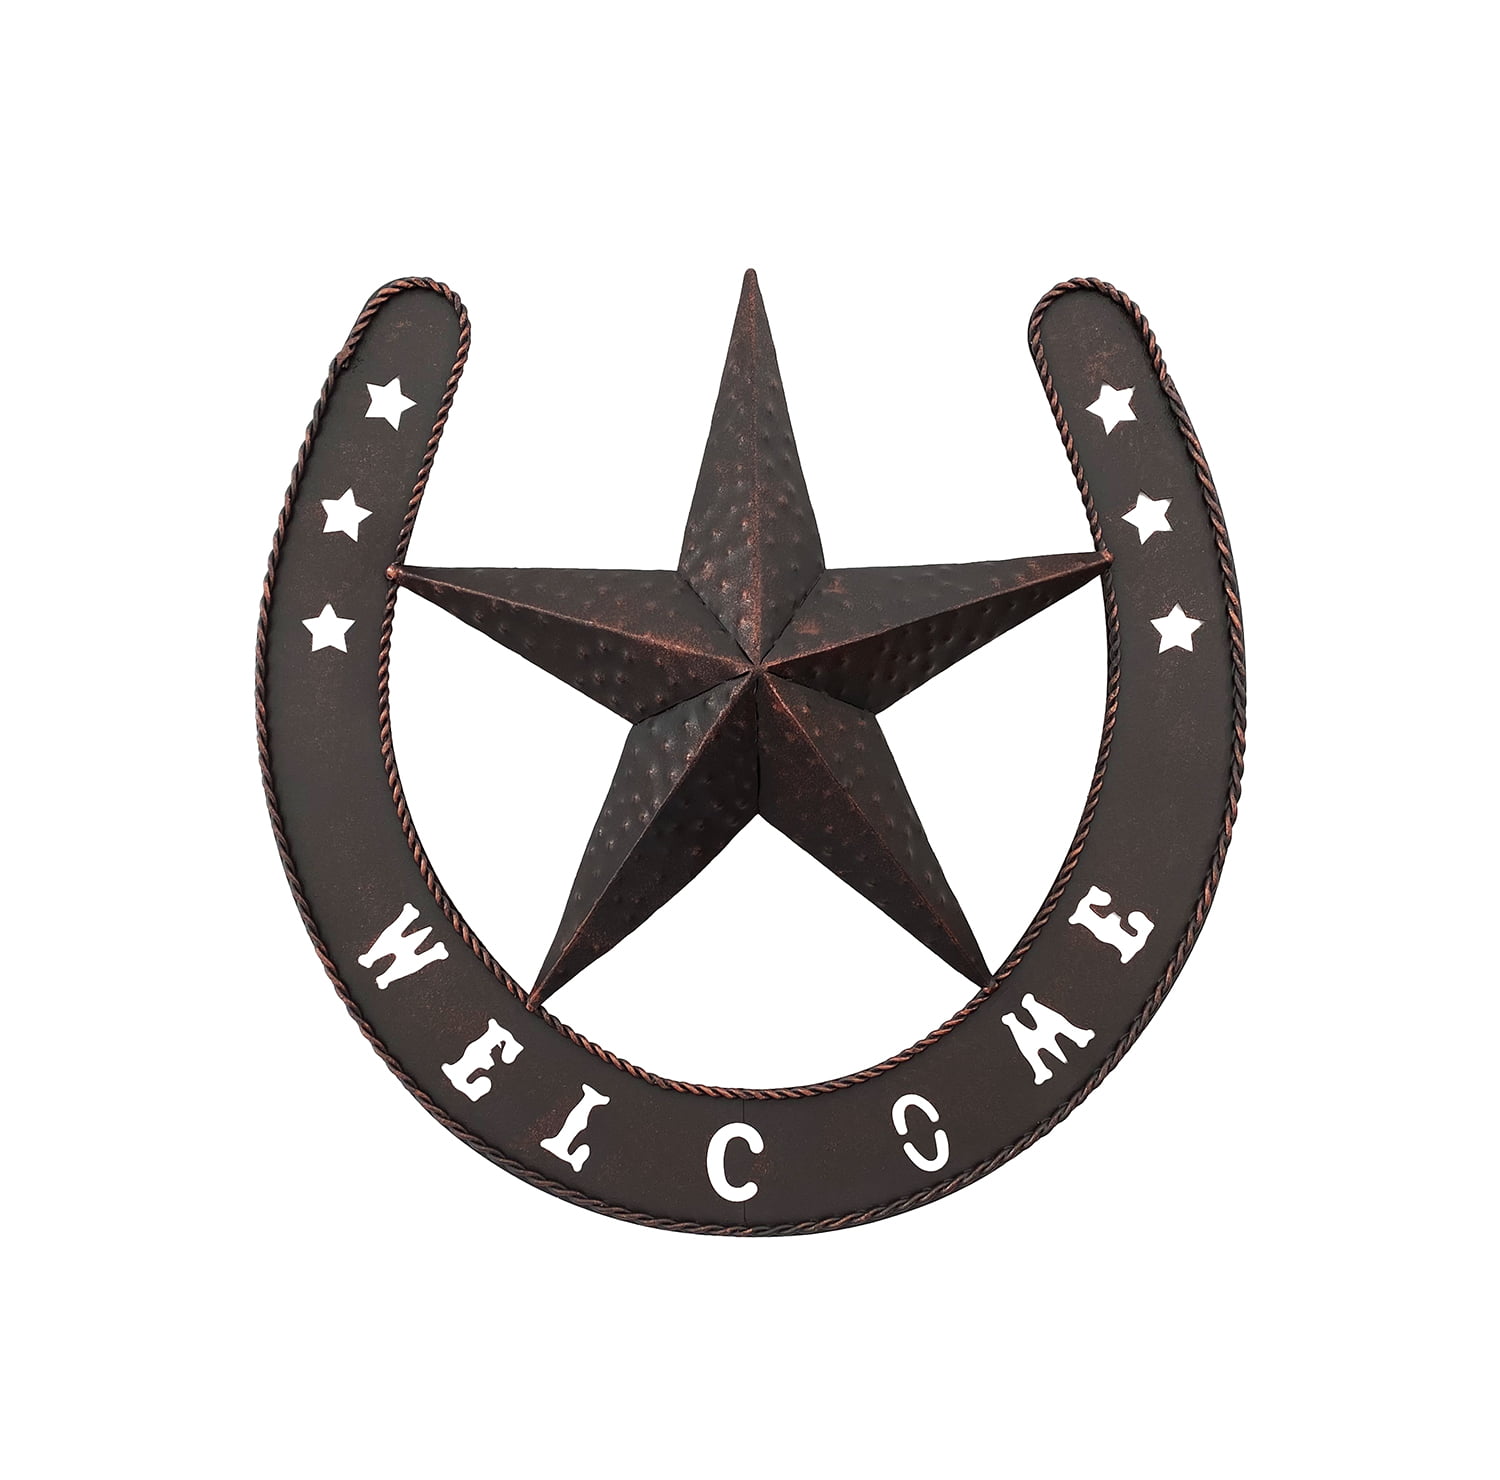 Western Star Welcome Wall Decor 10016999 for sale online 